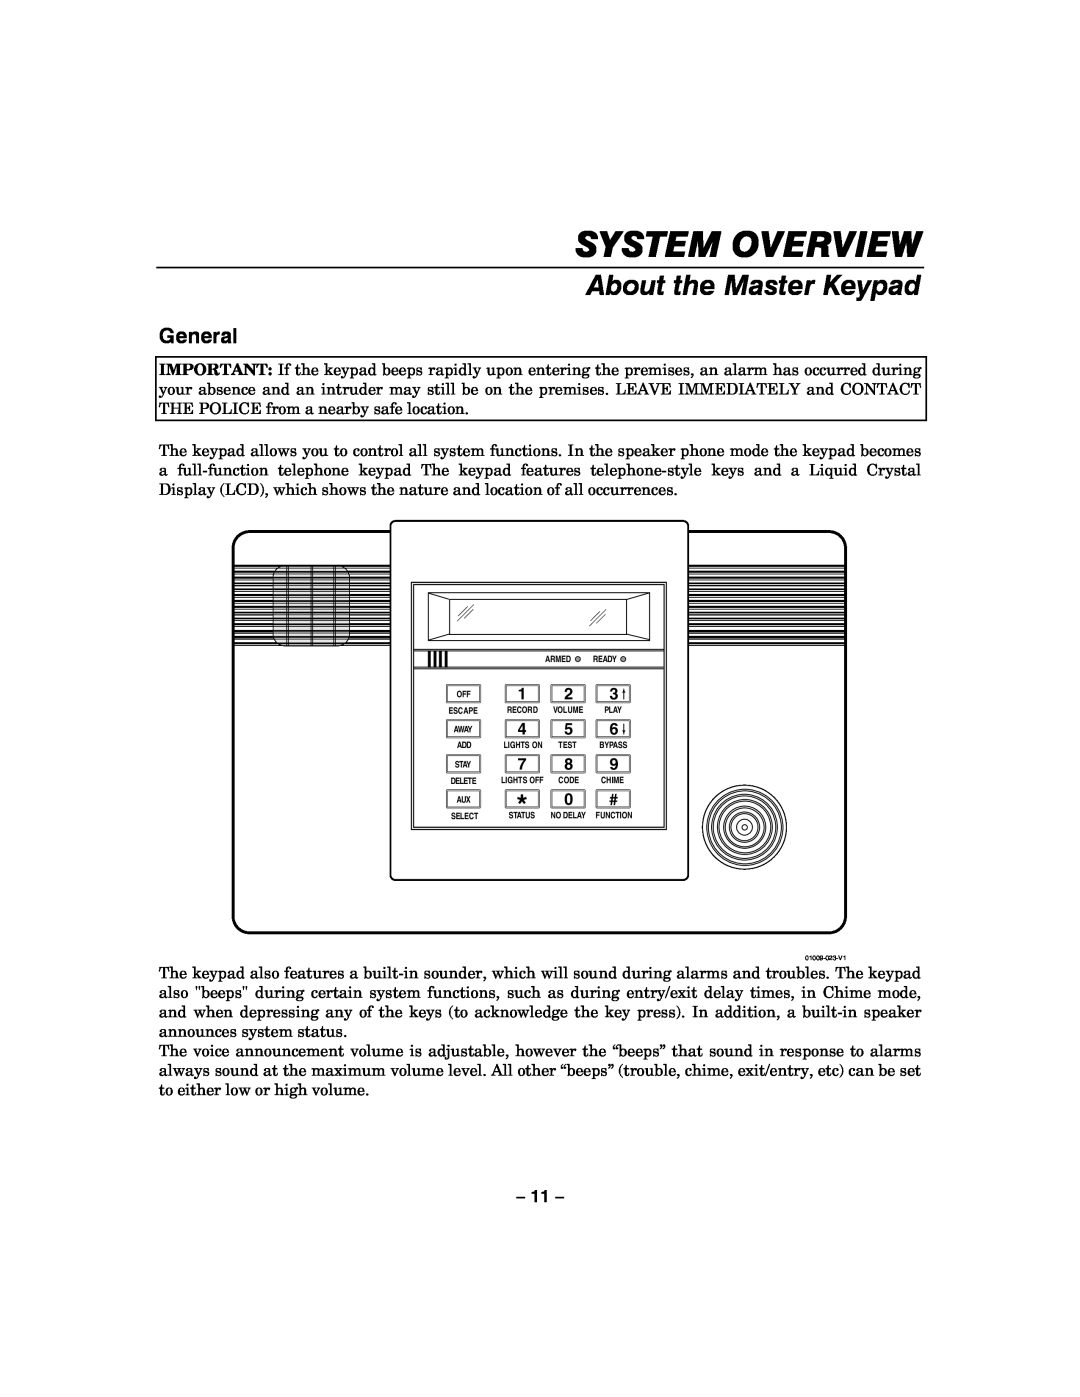 Honeywell LYNXR-I manual About the Master Keypad, General, System Overview 